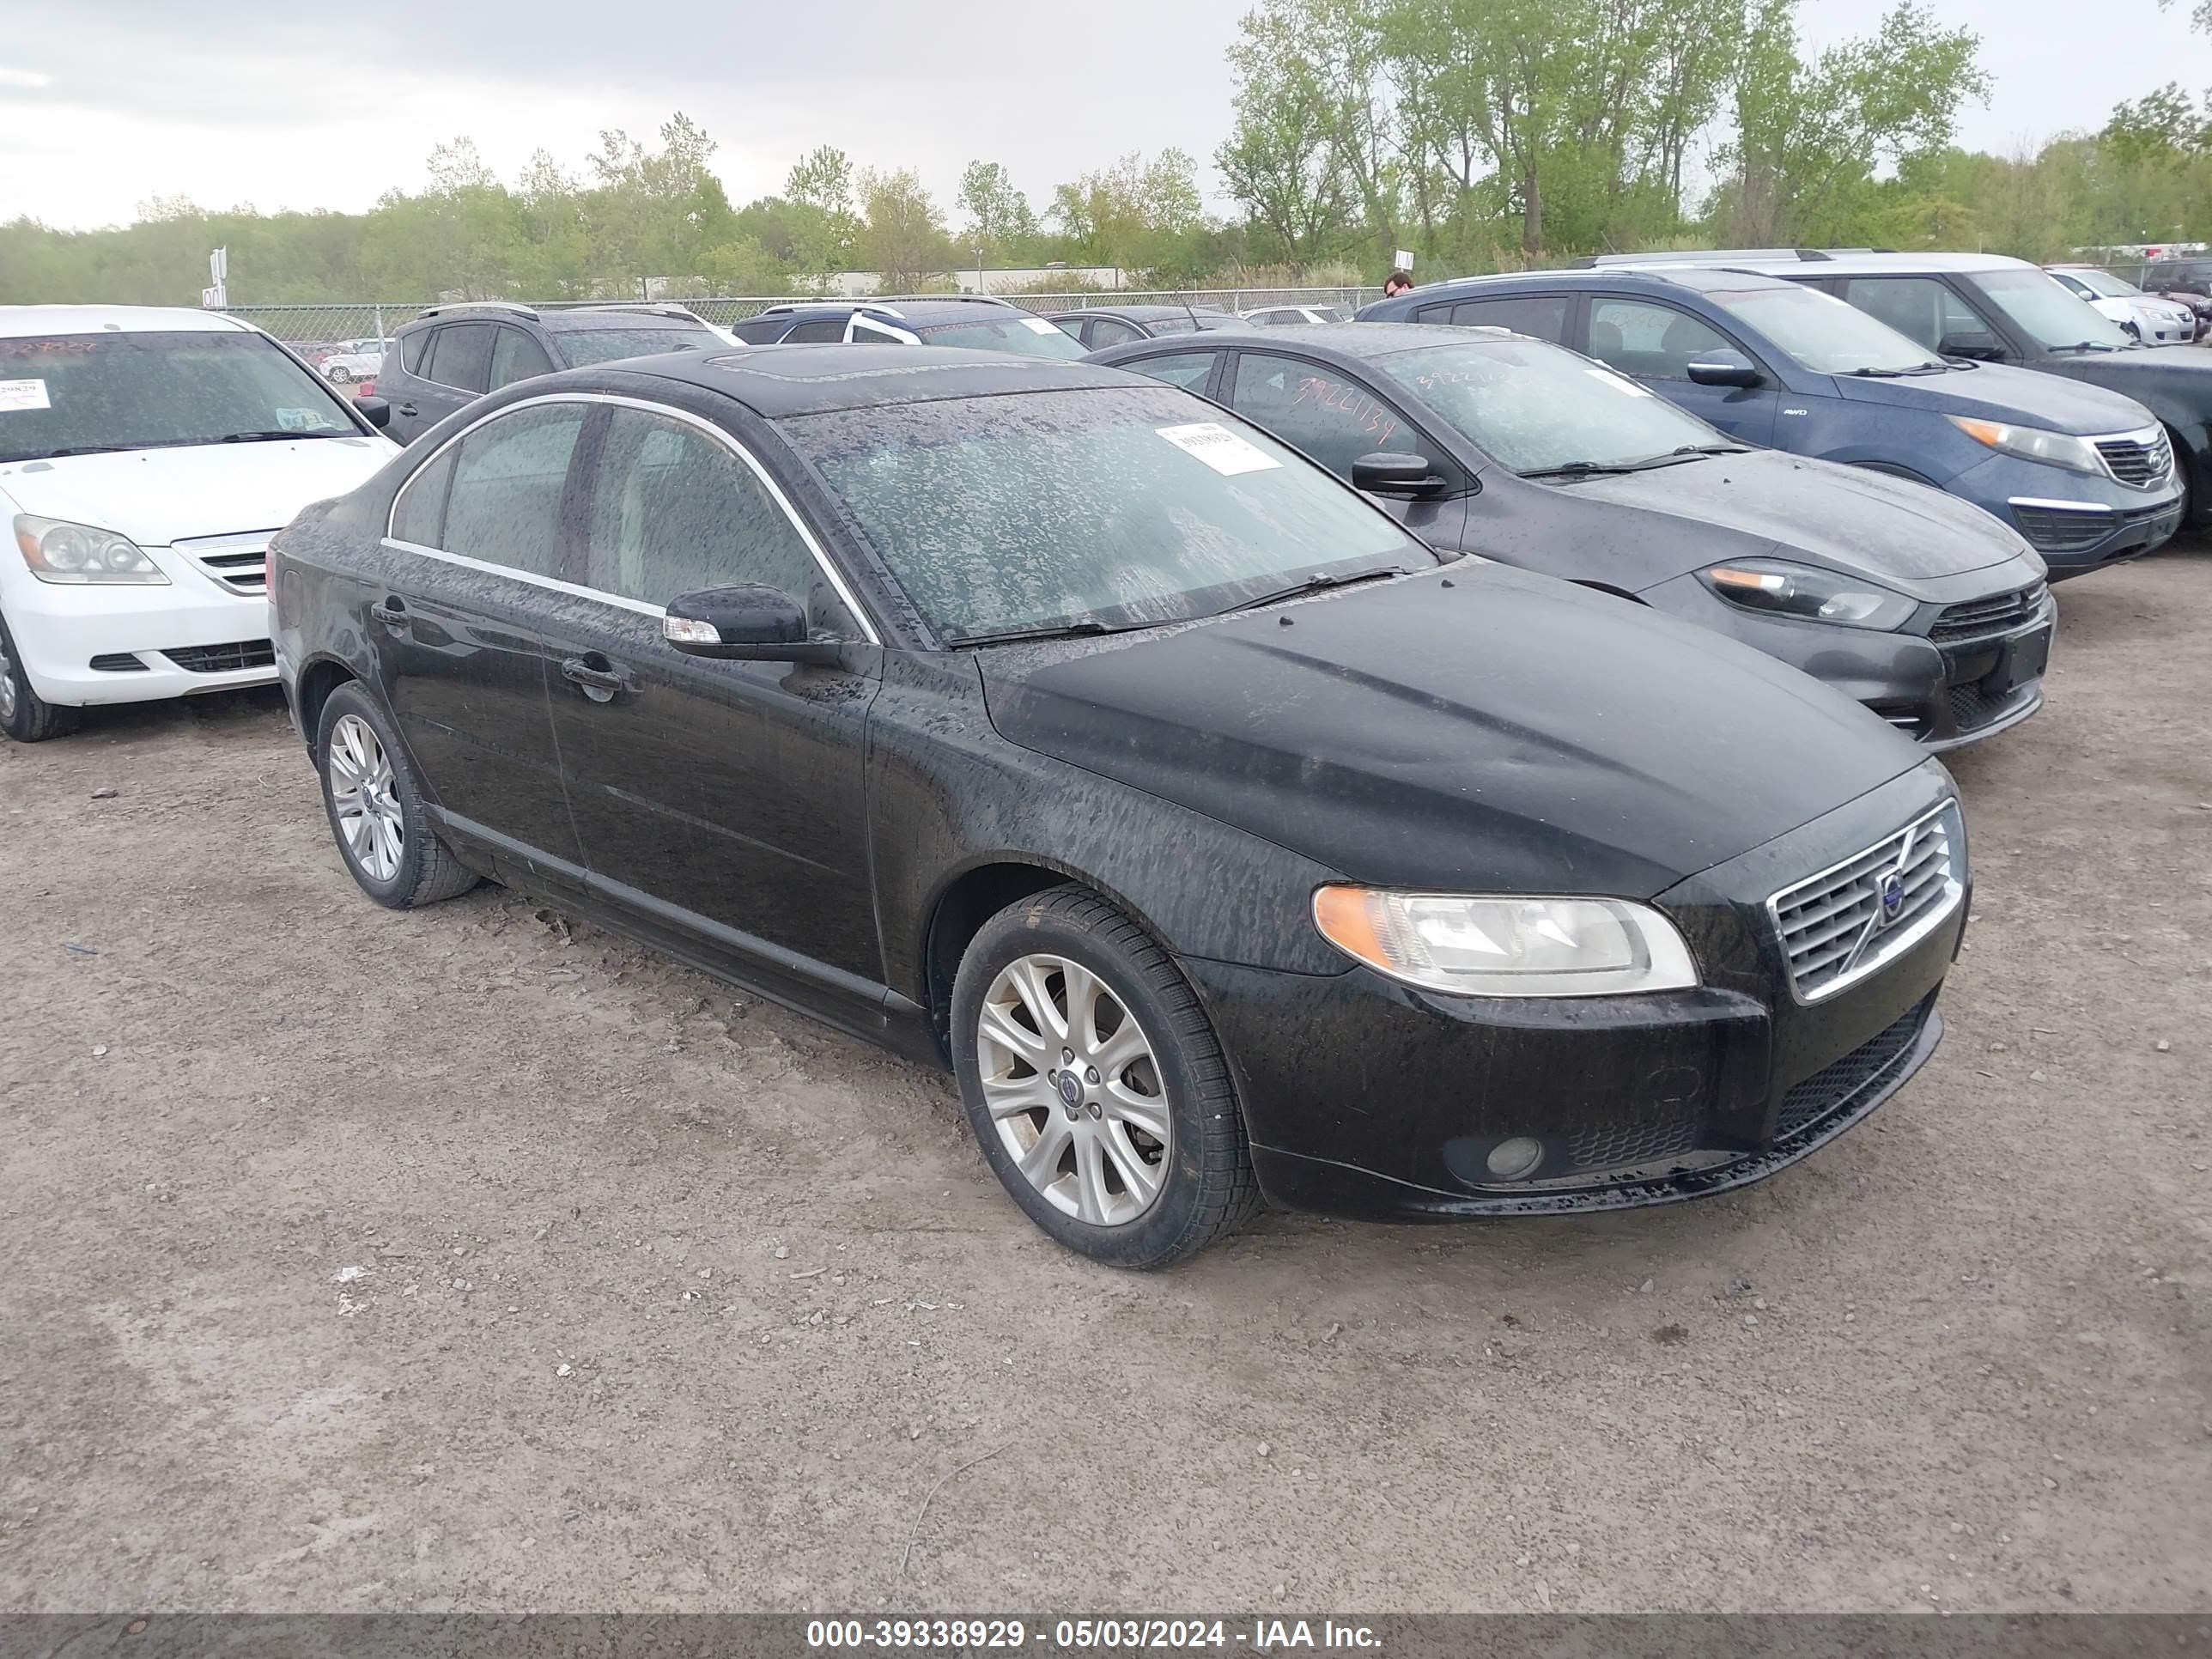 volvo s80 2009 yv1as982591105370